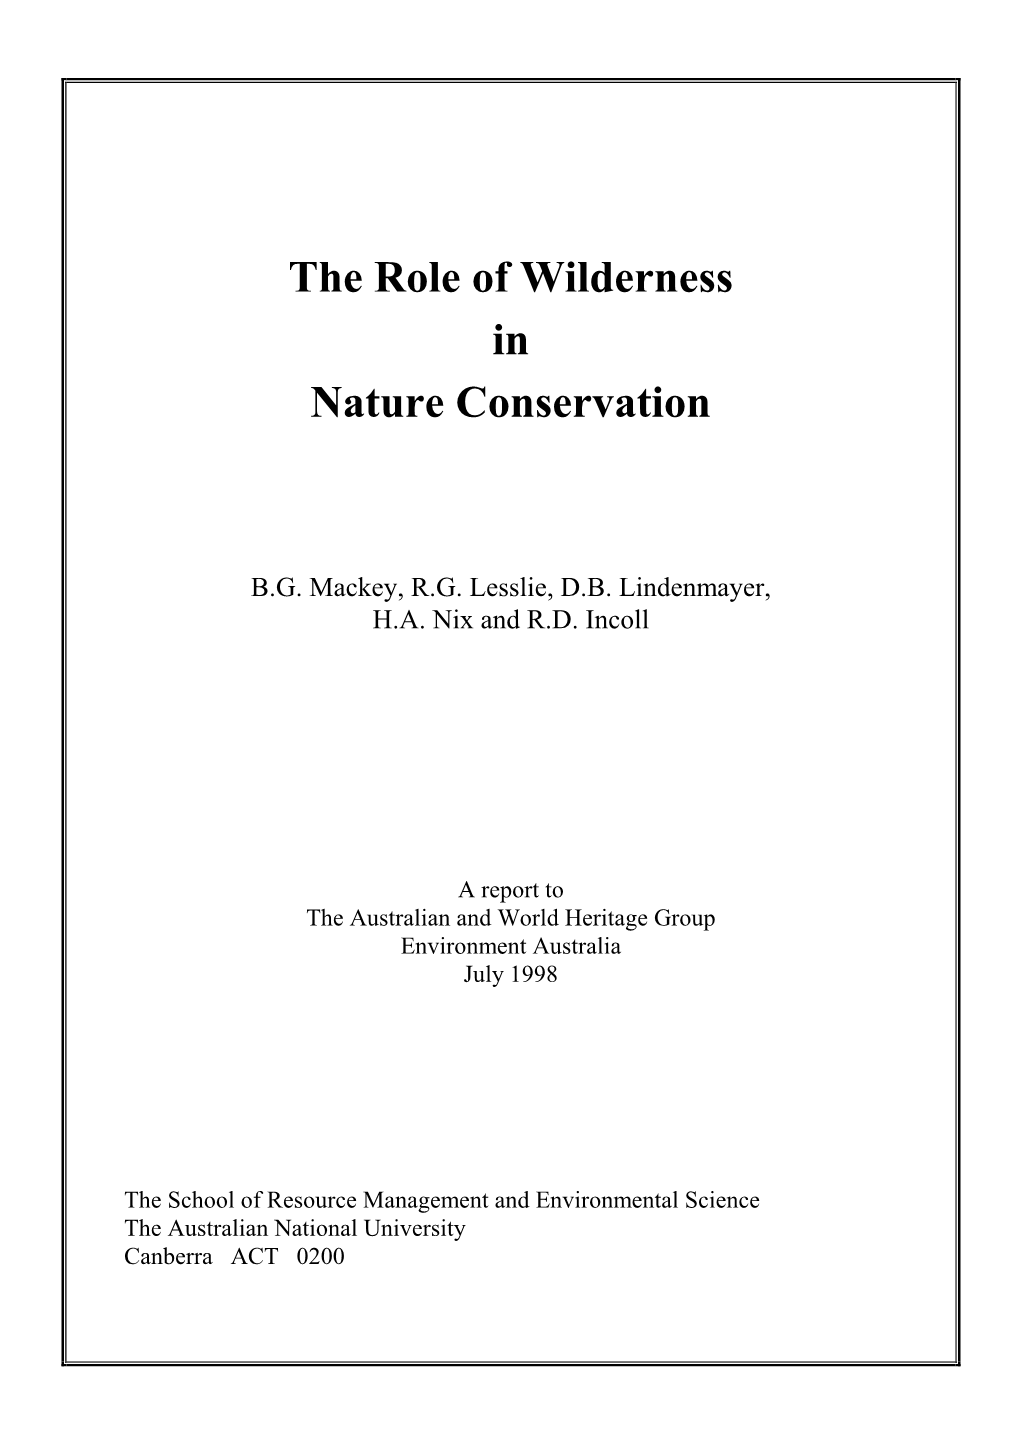 The Role of Wilderness in Nature Conservation